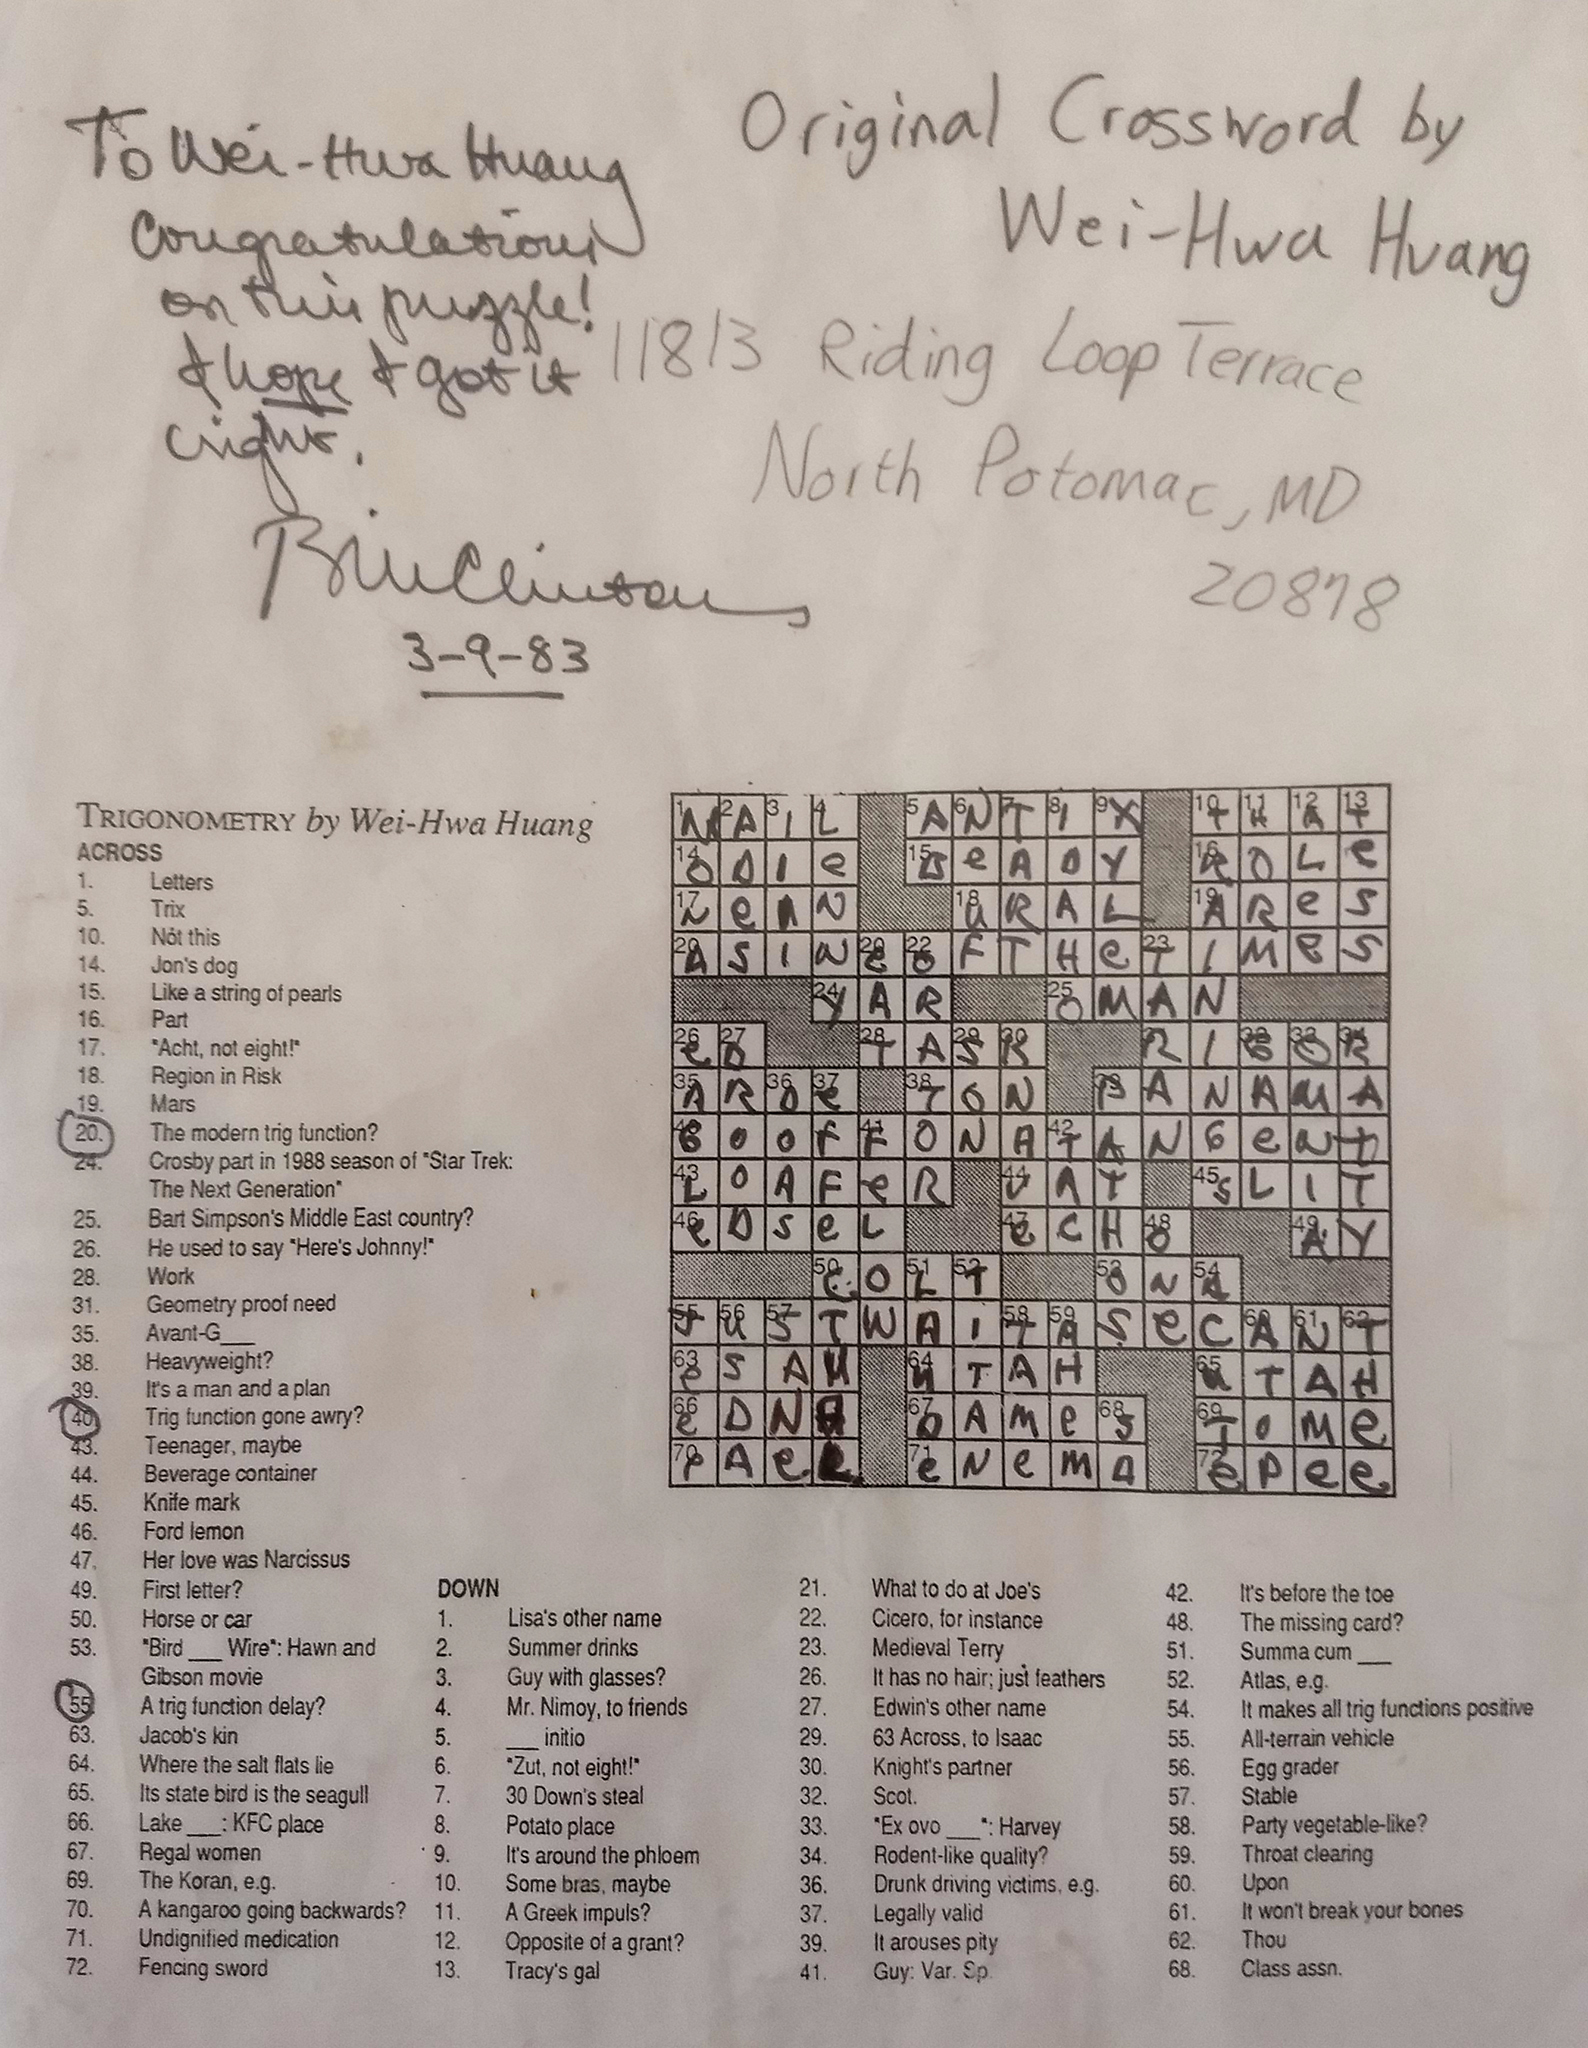 President Clinton sends completed crossword to STS finalist Wei-Hwa Huang 